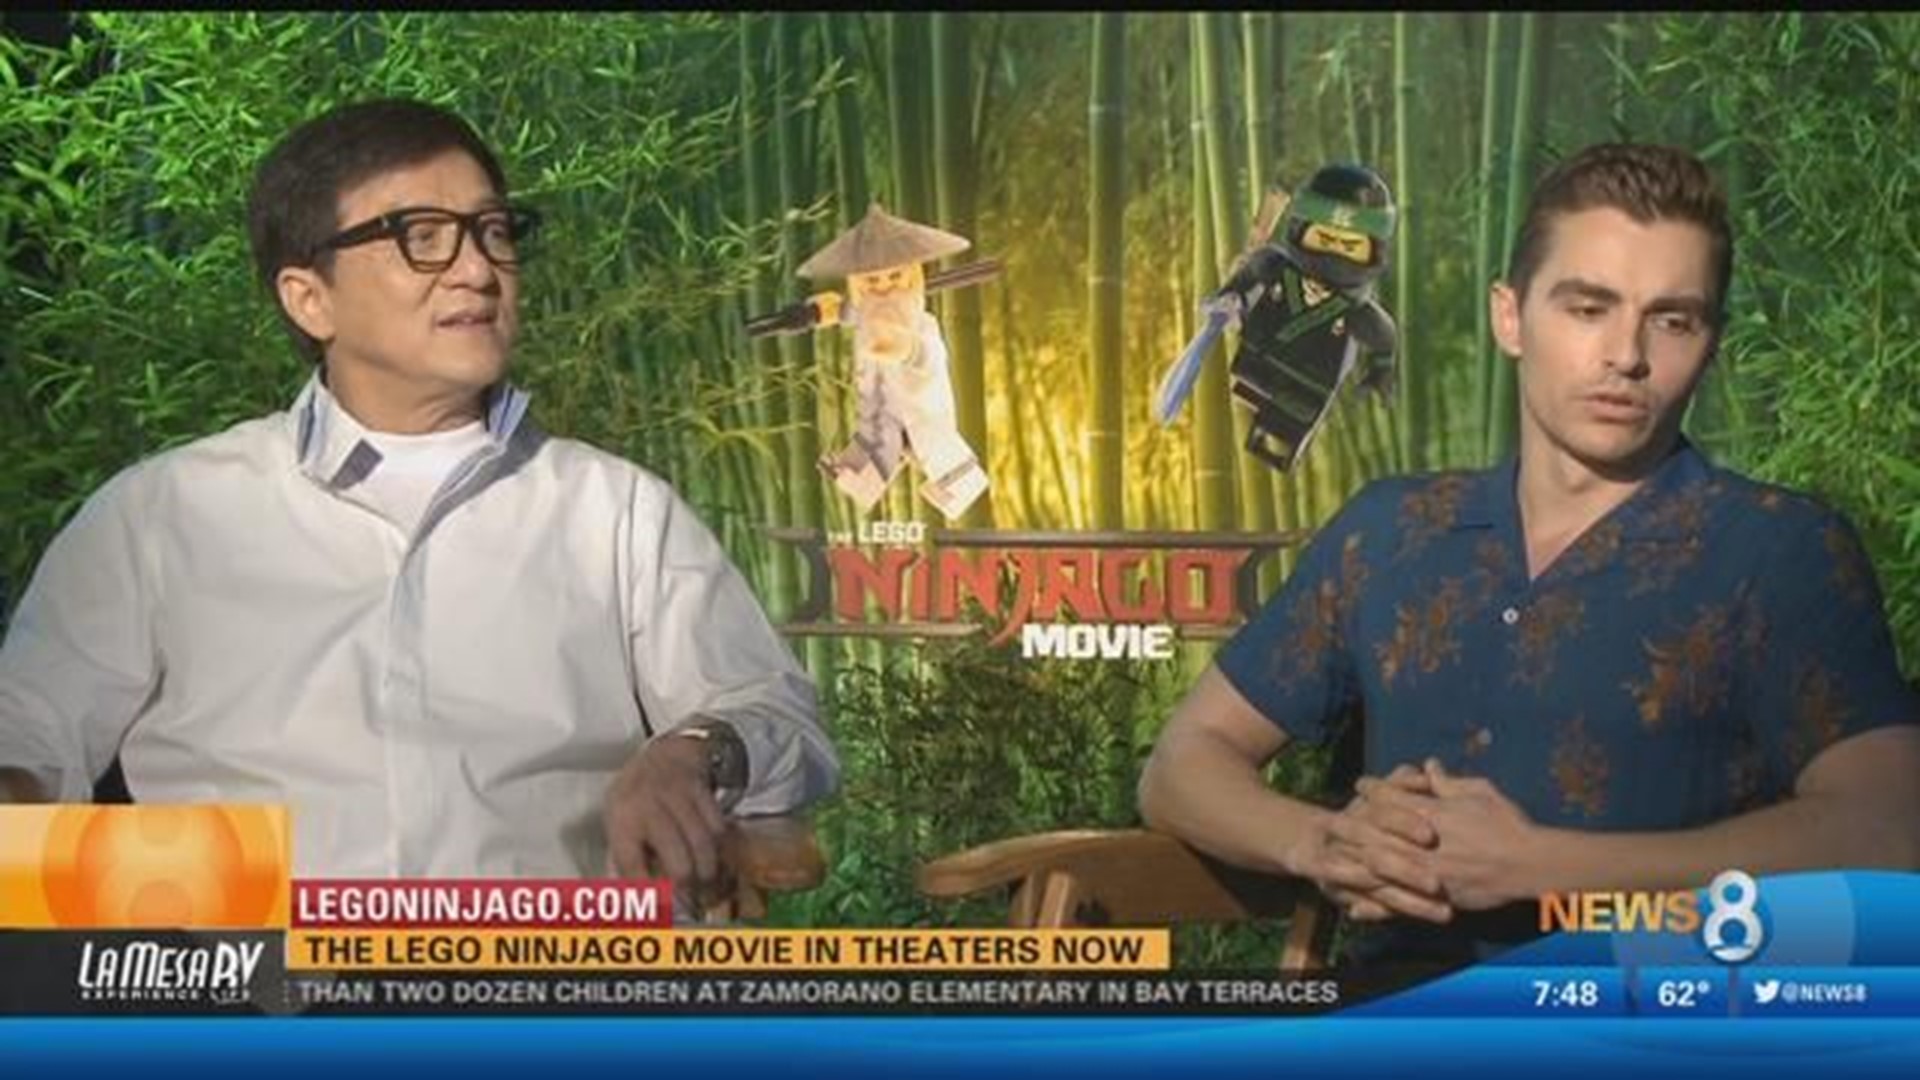 Chat With The Cast Of The The Lego Ninjago Movie Cbs8 Com